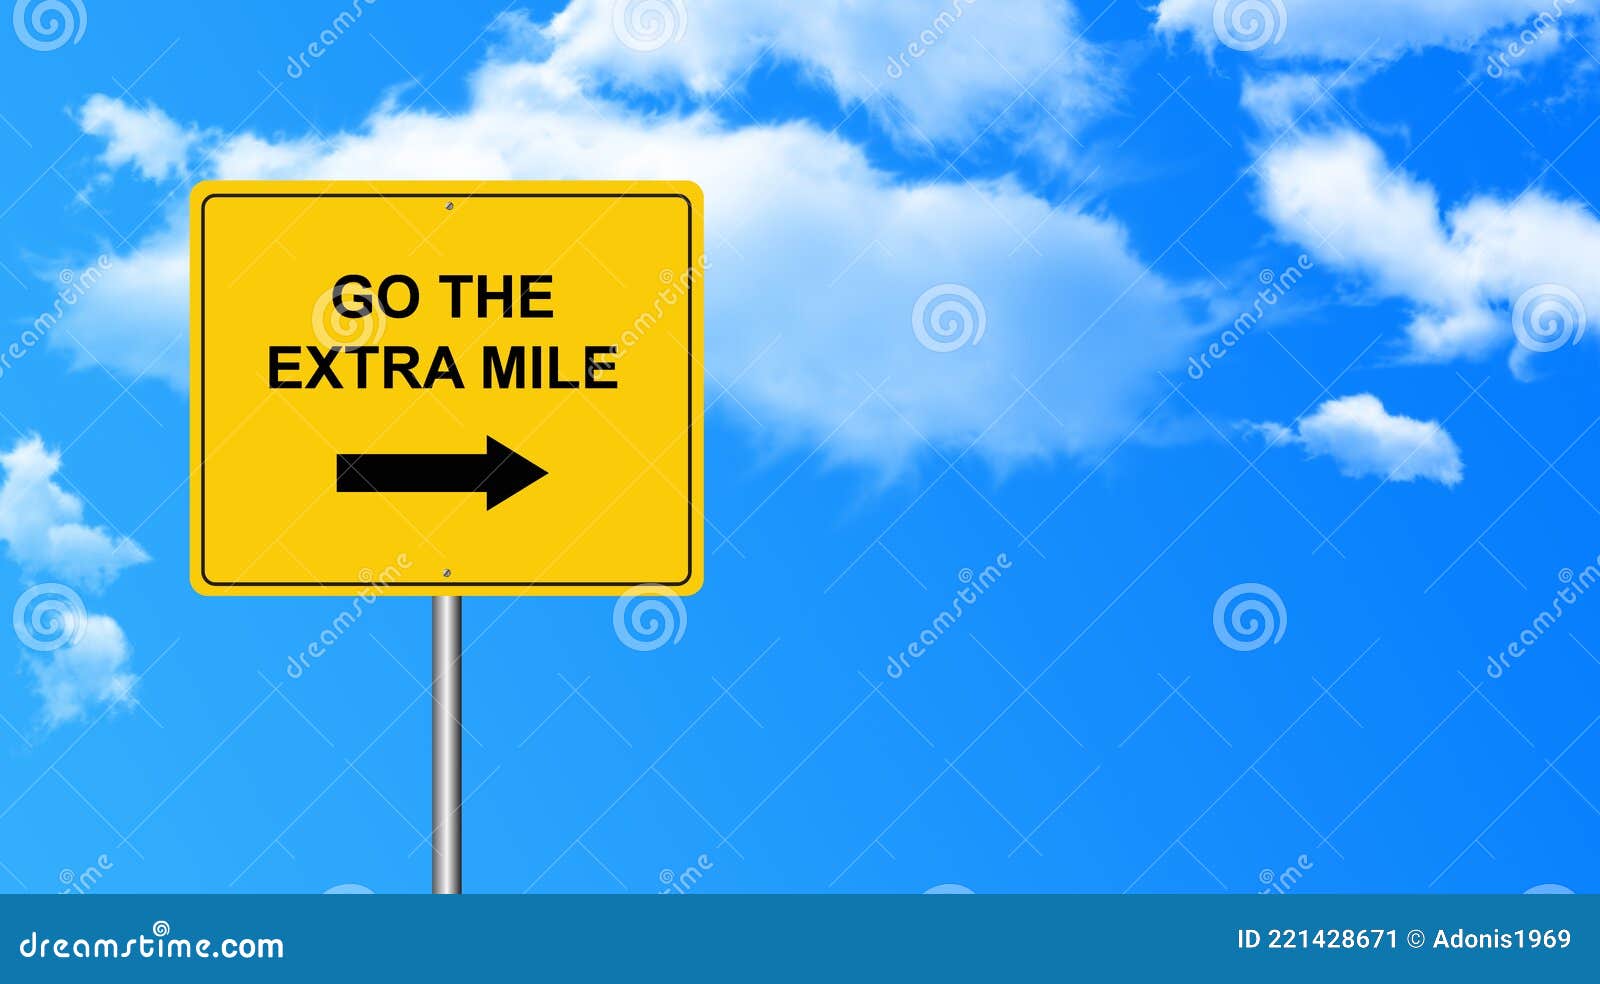 go the extra mile traffic sign